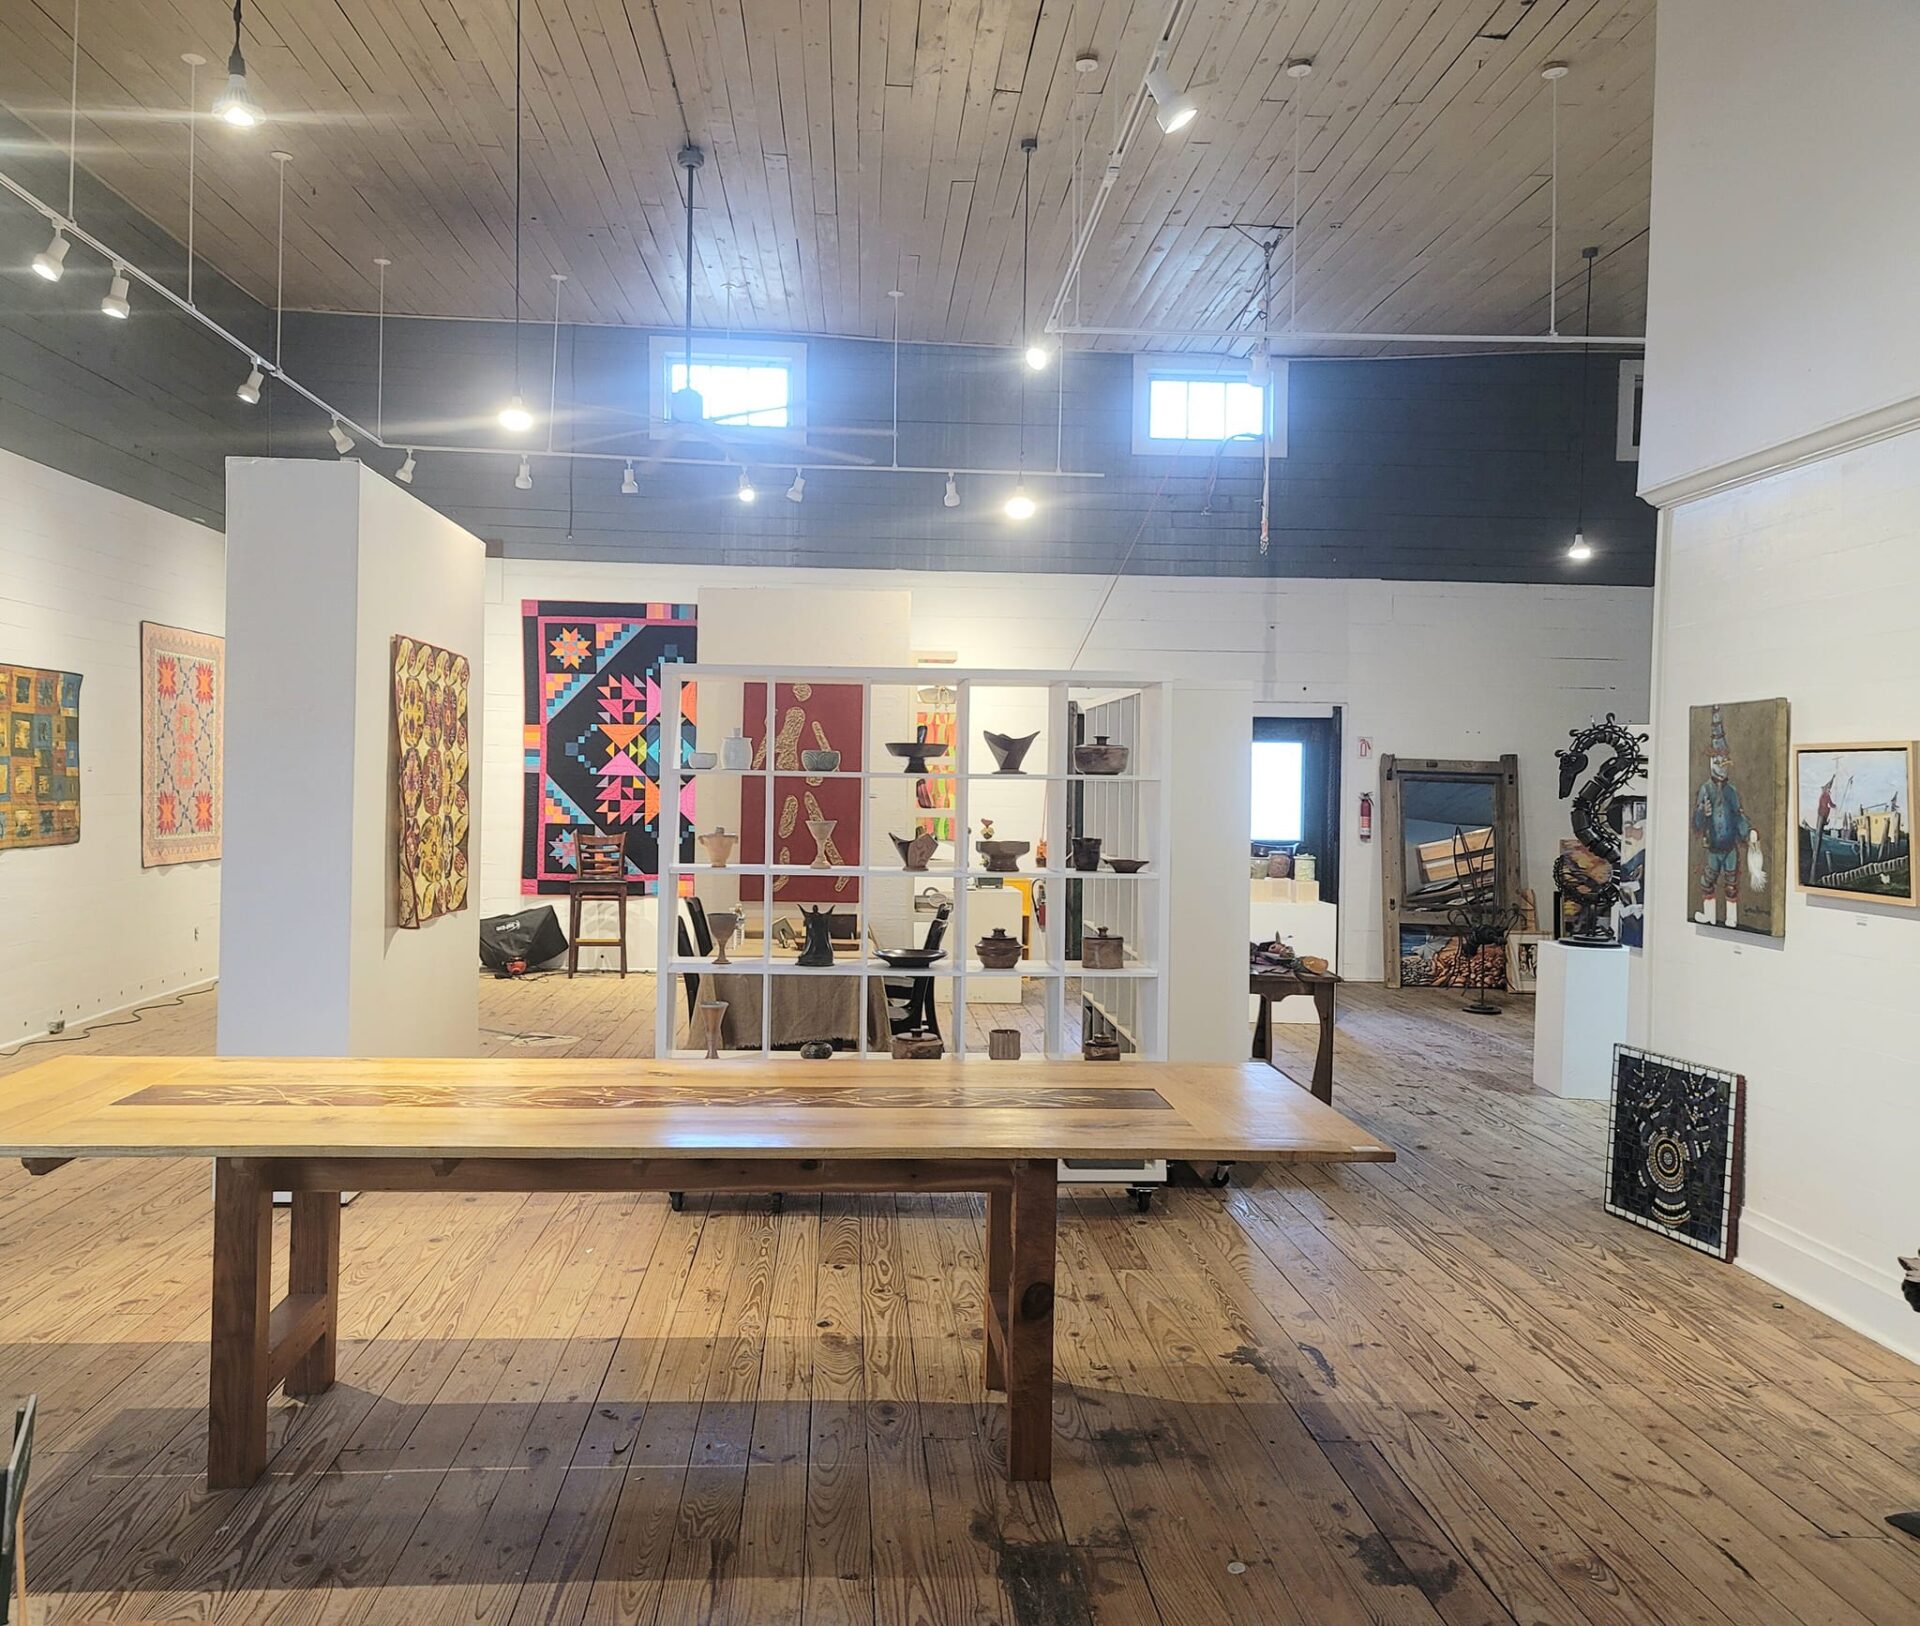 NUNU Art and Culture Collective is just one of many sites to see while visiting Arnaudville, Breaux Bridge, and Lake Martin.